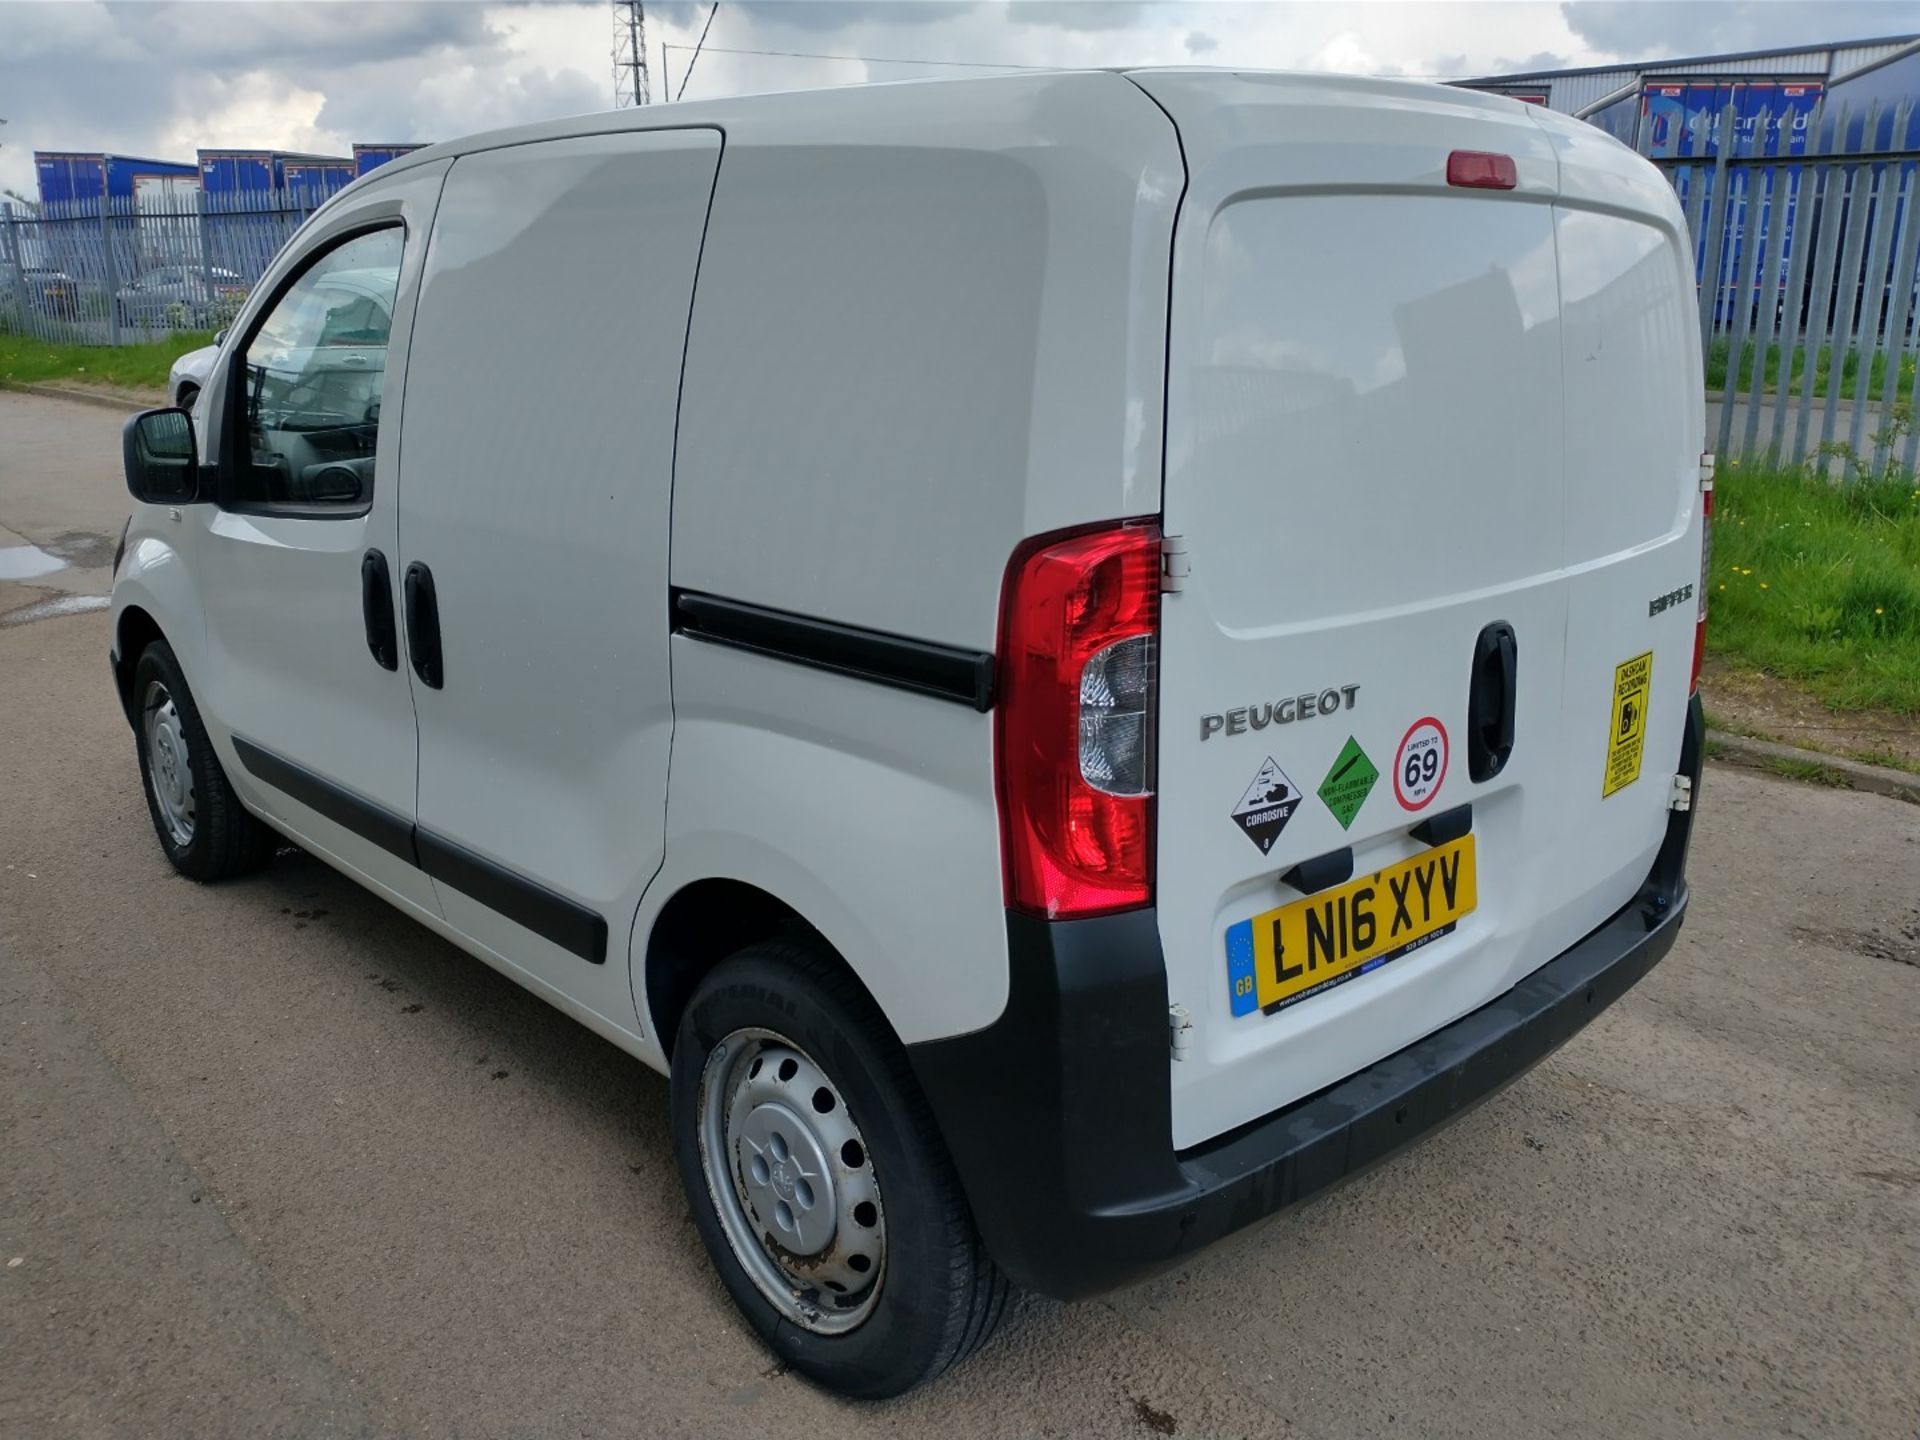 2016 Peugeot Bipper S Hdi Panel van - CL505 - Location: Corby - Image 10 of 15